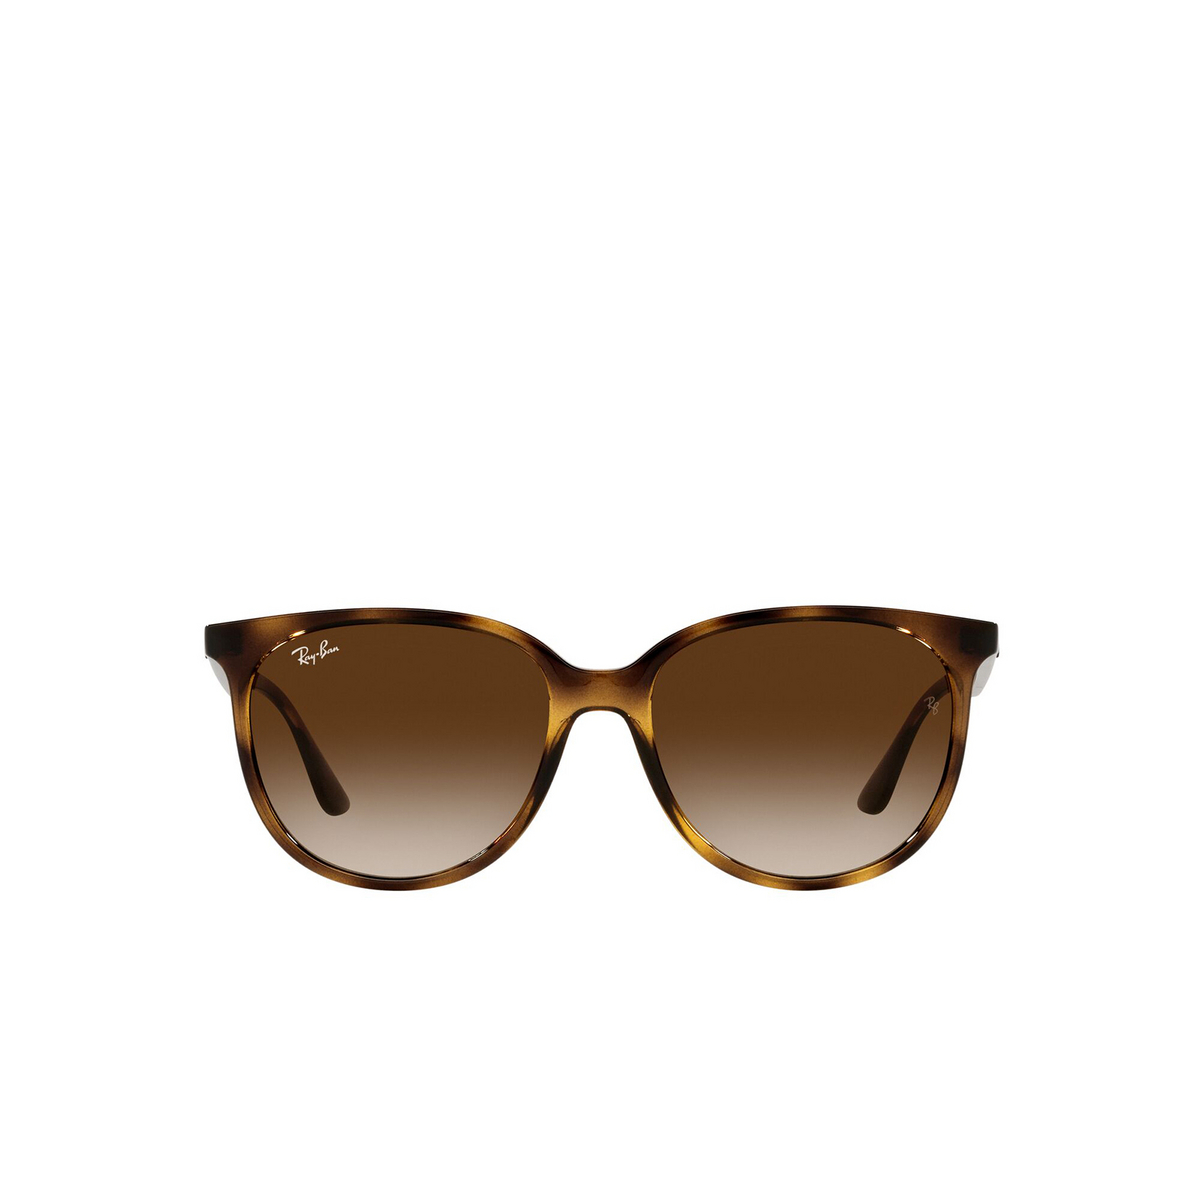 Ray-Ban® Square Sunglasses: RB4378 color Havana 710/13 - front view.